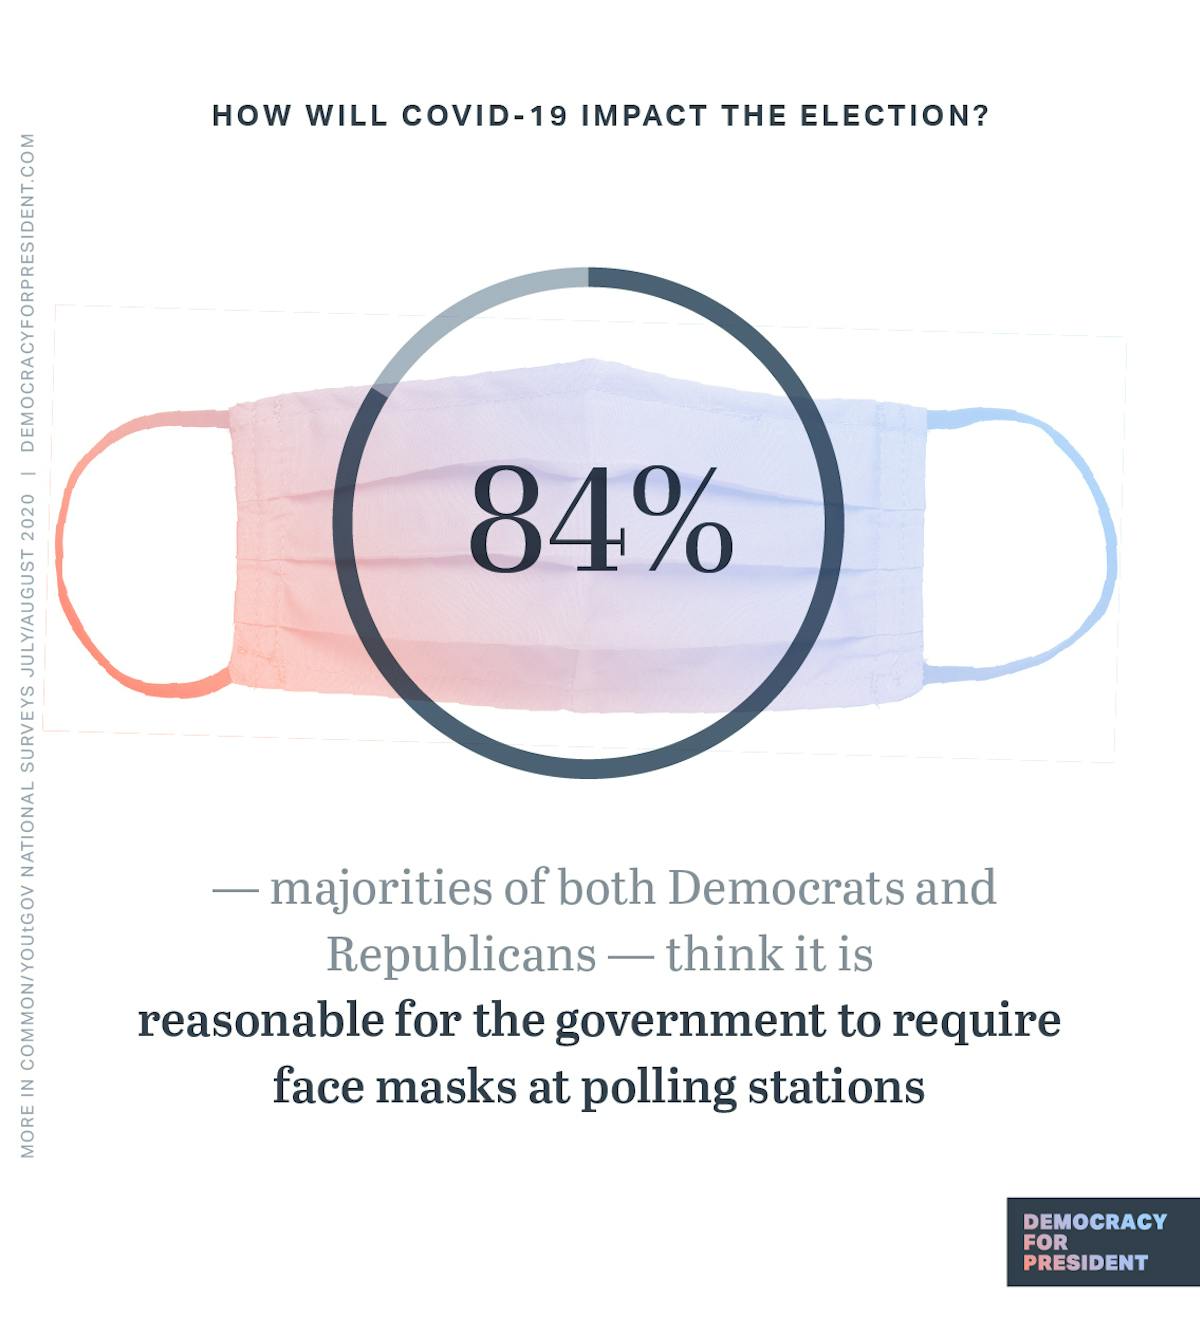 How will COVID-19 impact the election? Majorities of both Democrats and Republicans think it is reasonable for the government to require face masks at polling stations.